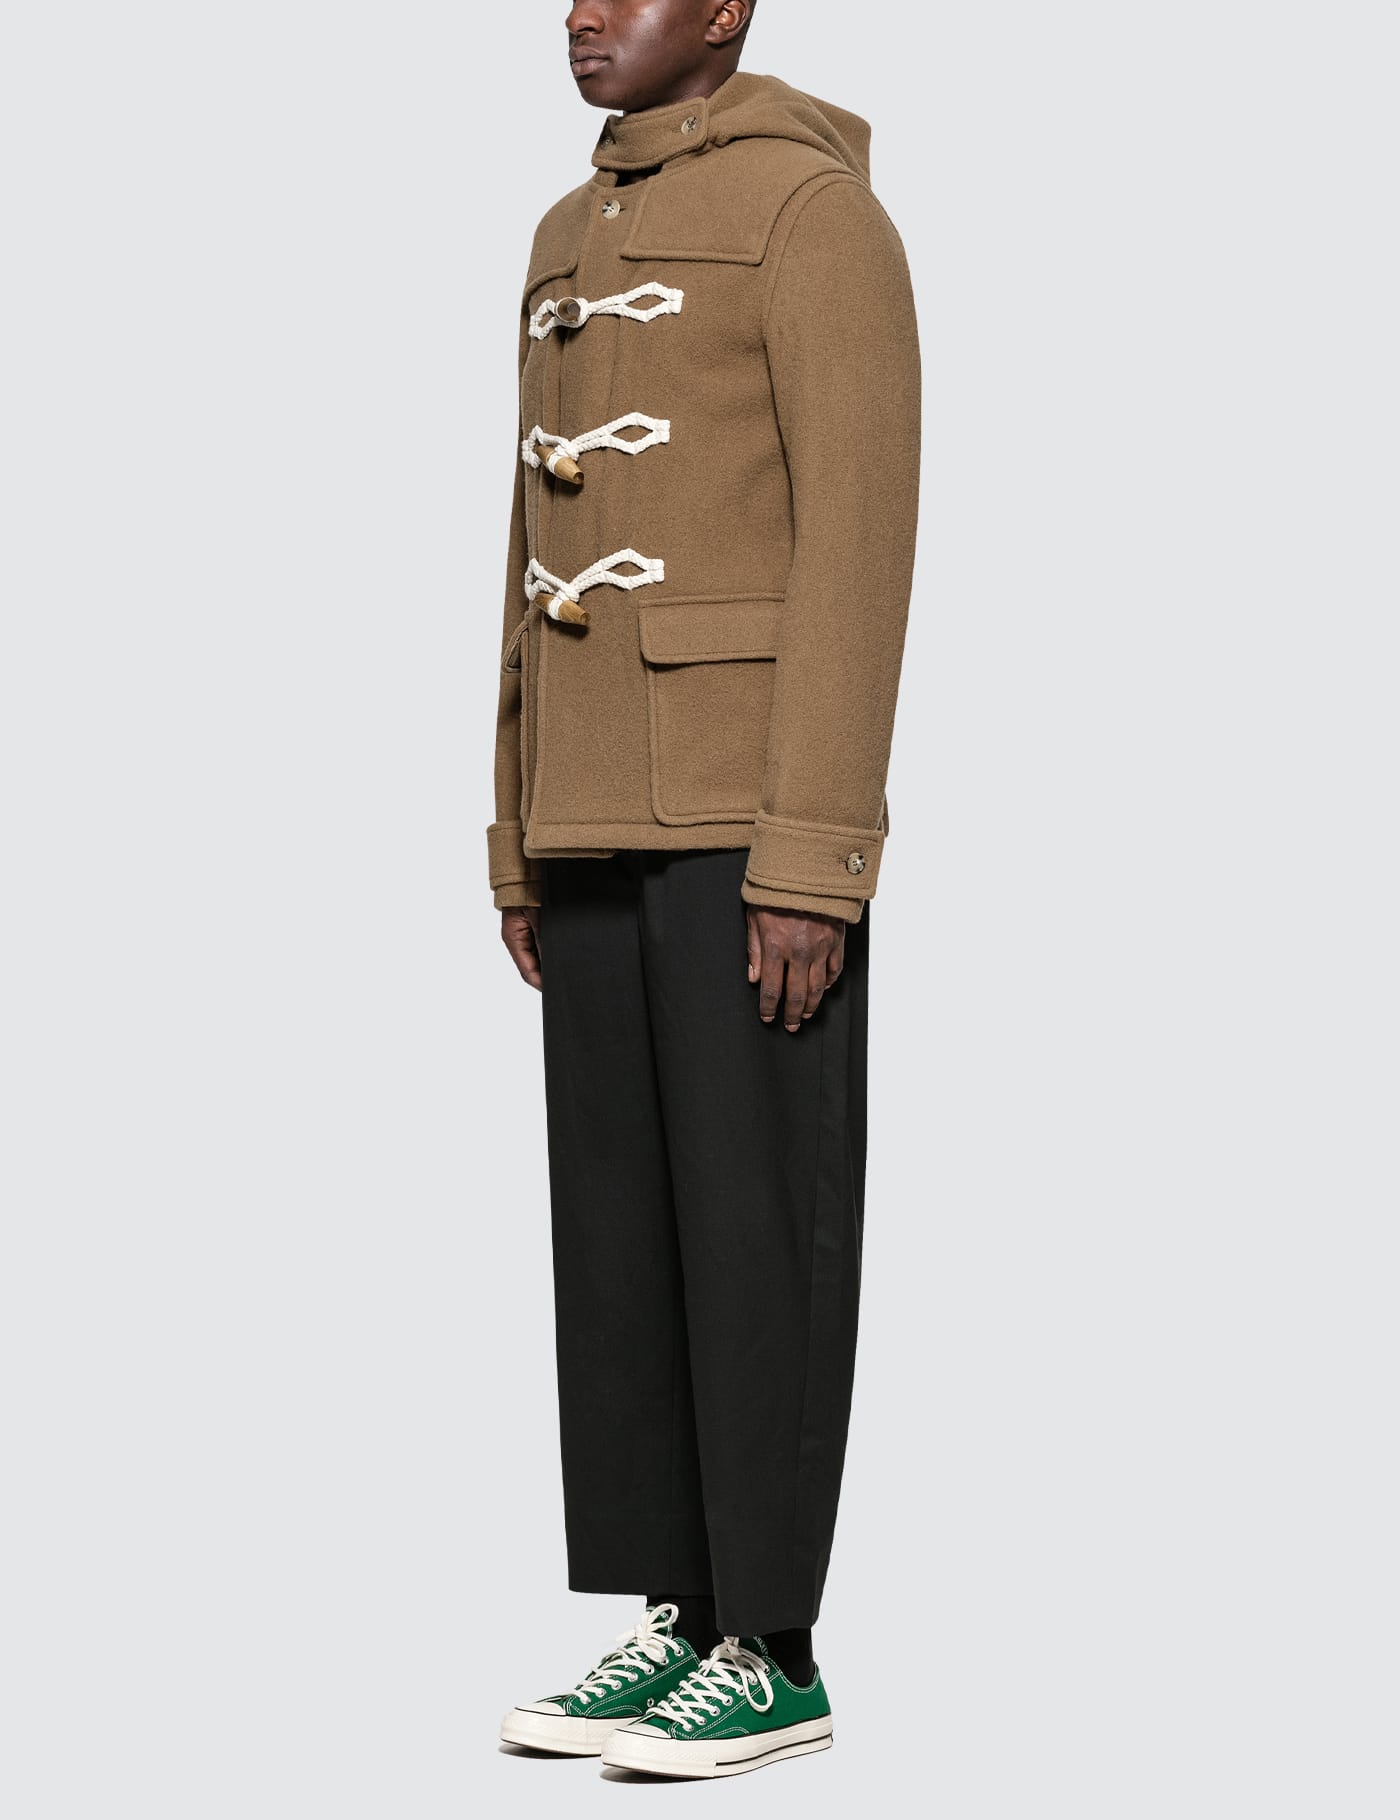 JW Anderson - Duffle Coat | HBX - Globally Curated Fashion and